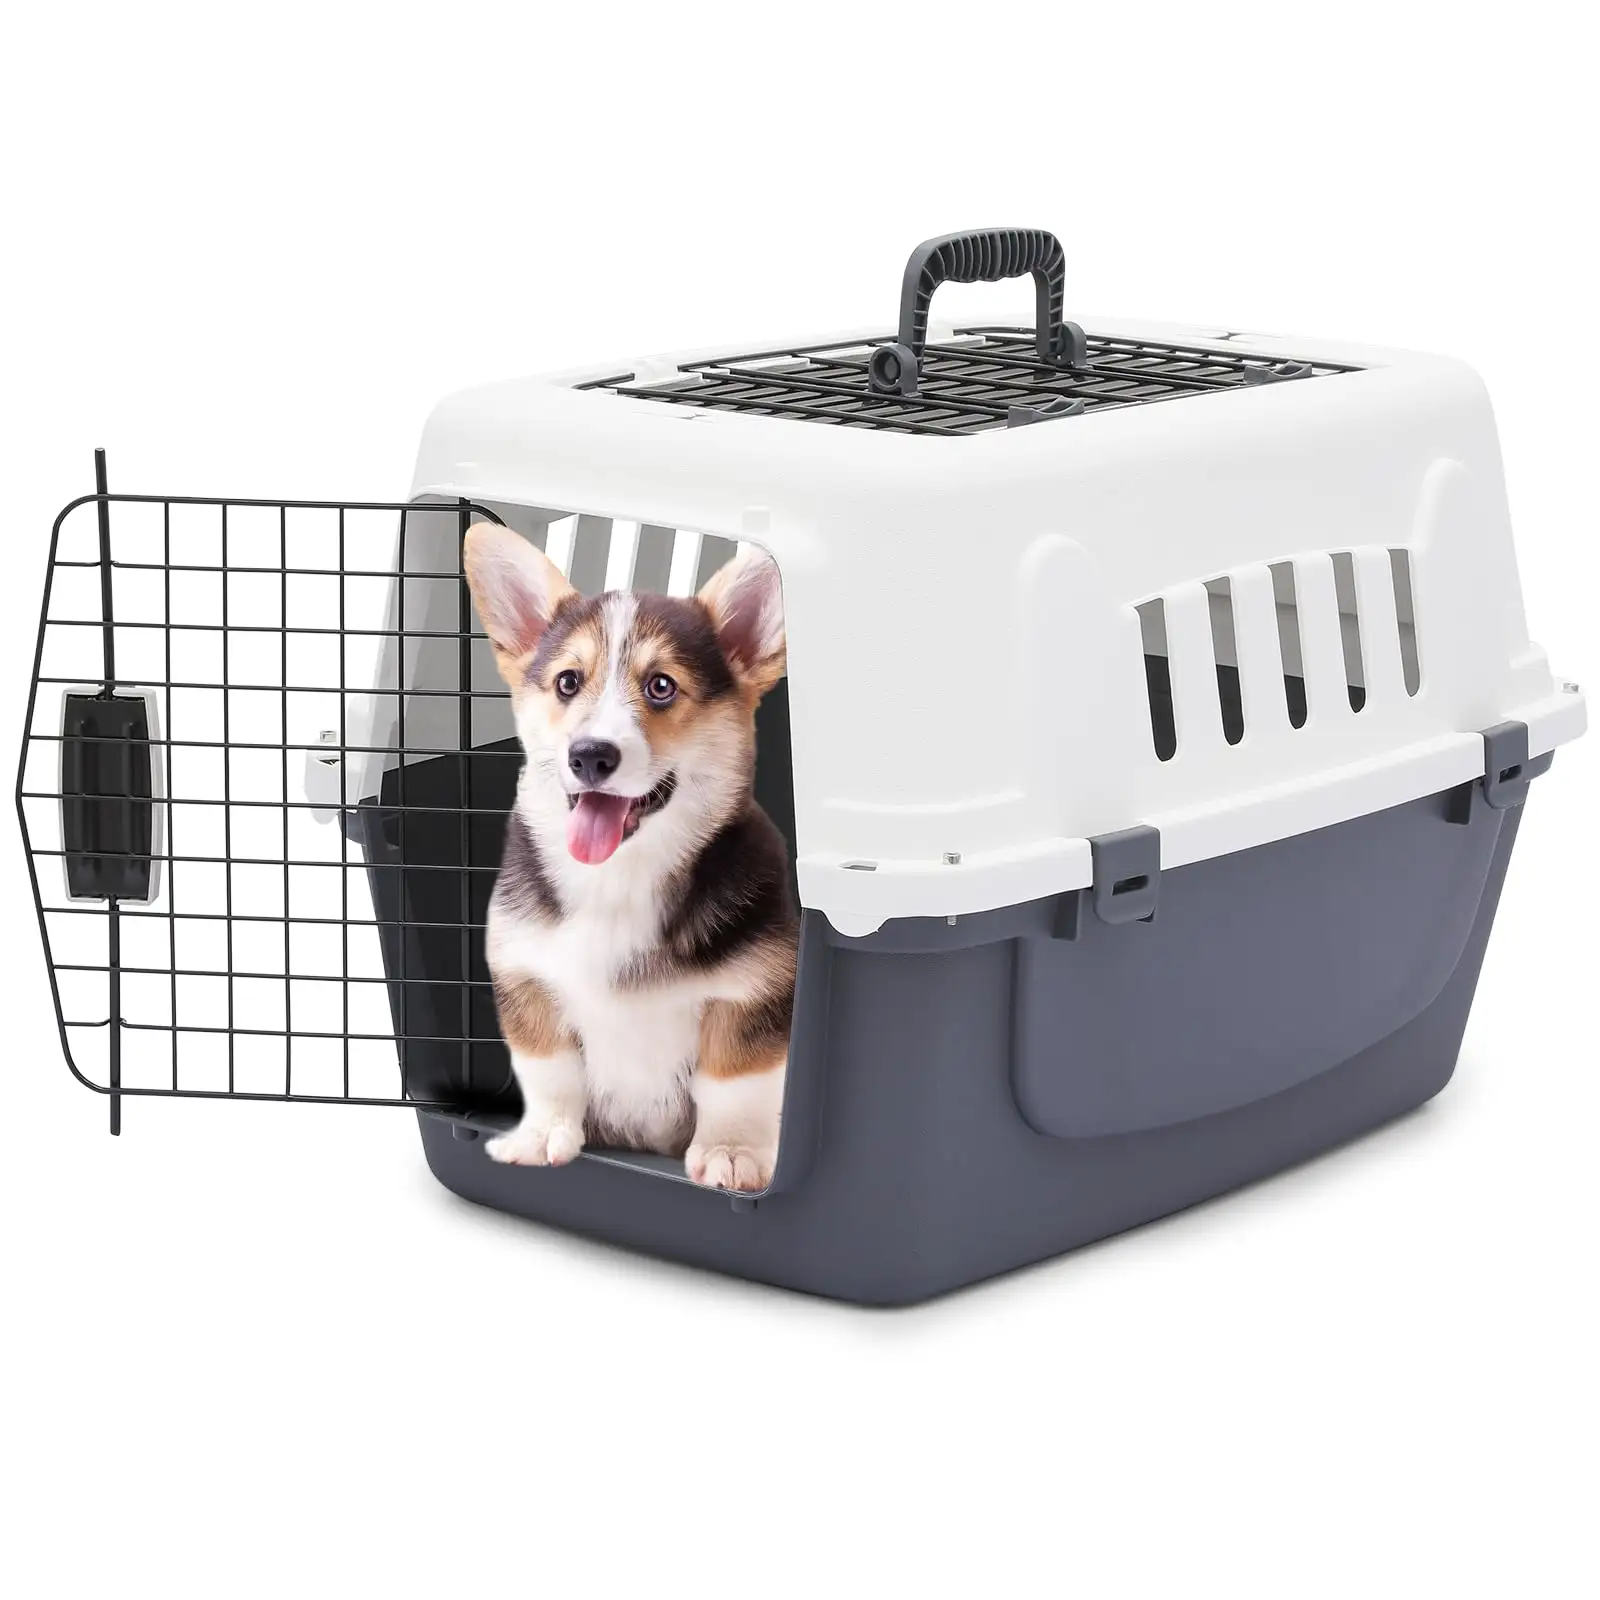 Triangle-Shaped Plastic Kennels Rolling Airline Approved Pet Carrier with Wire Door Stainless Steel Travel Dog Crate for Cats